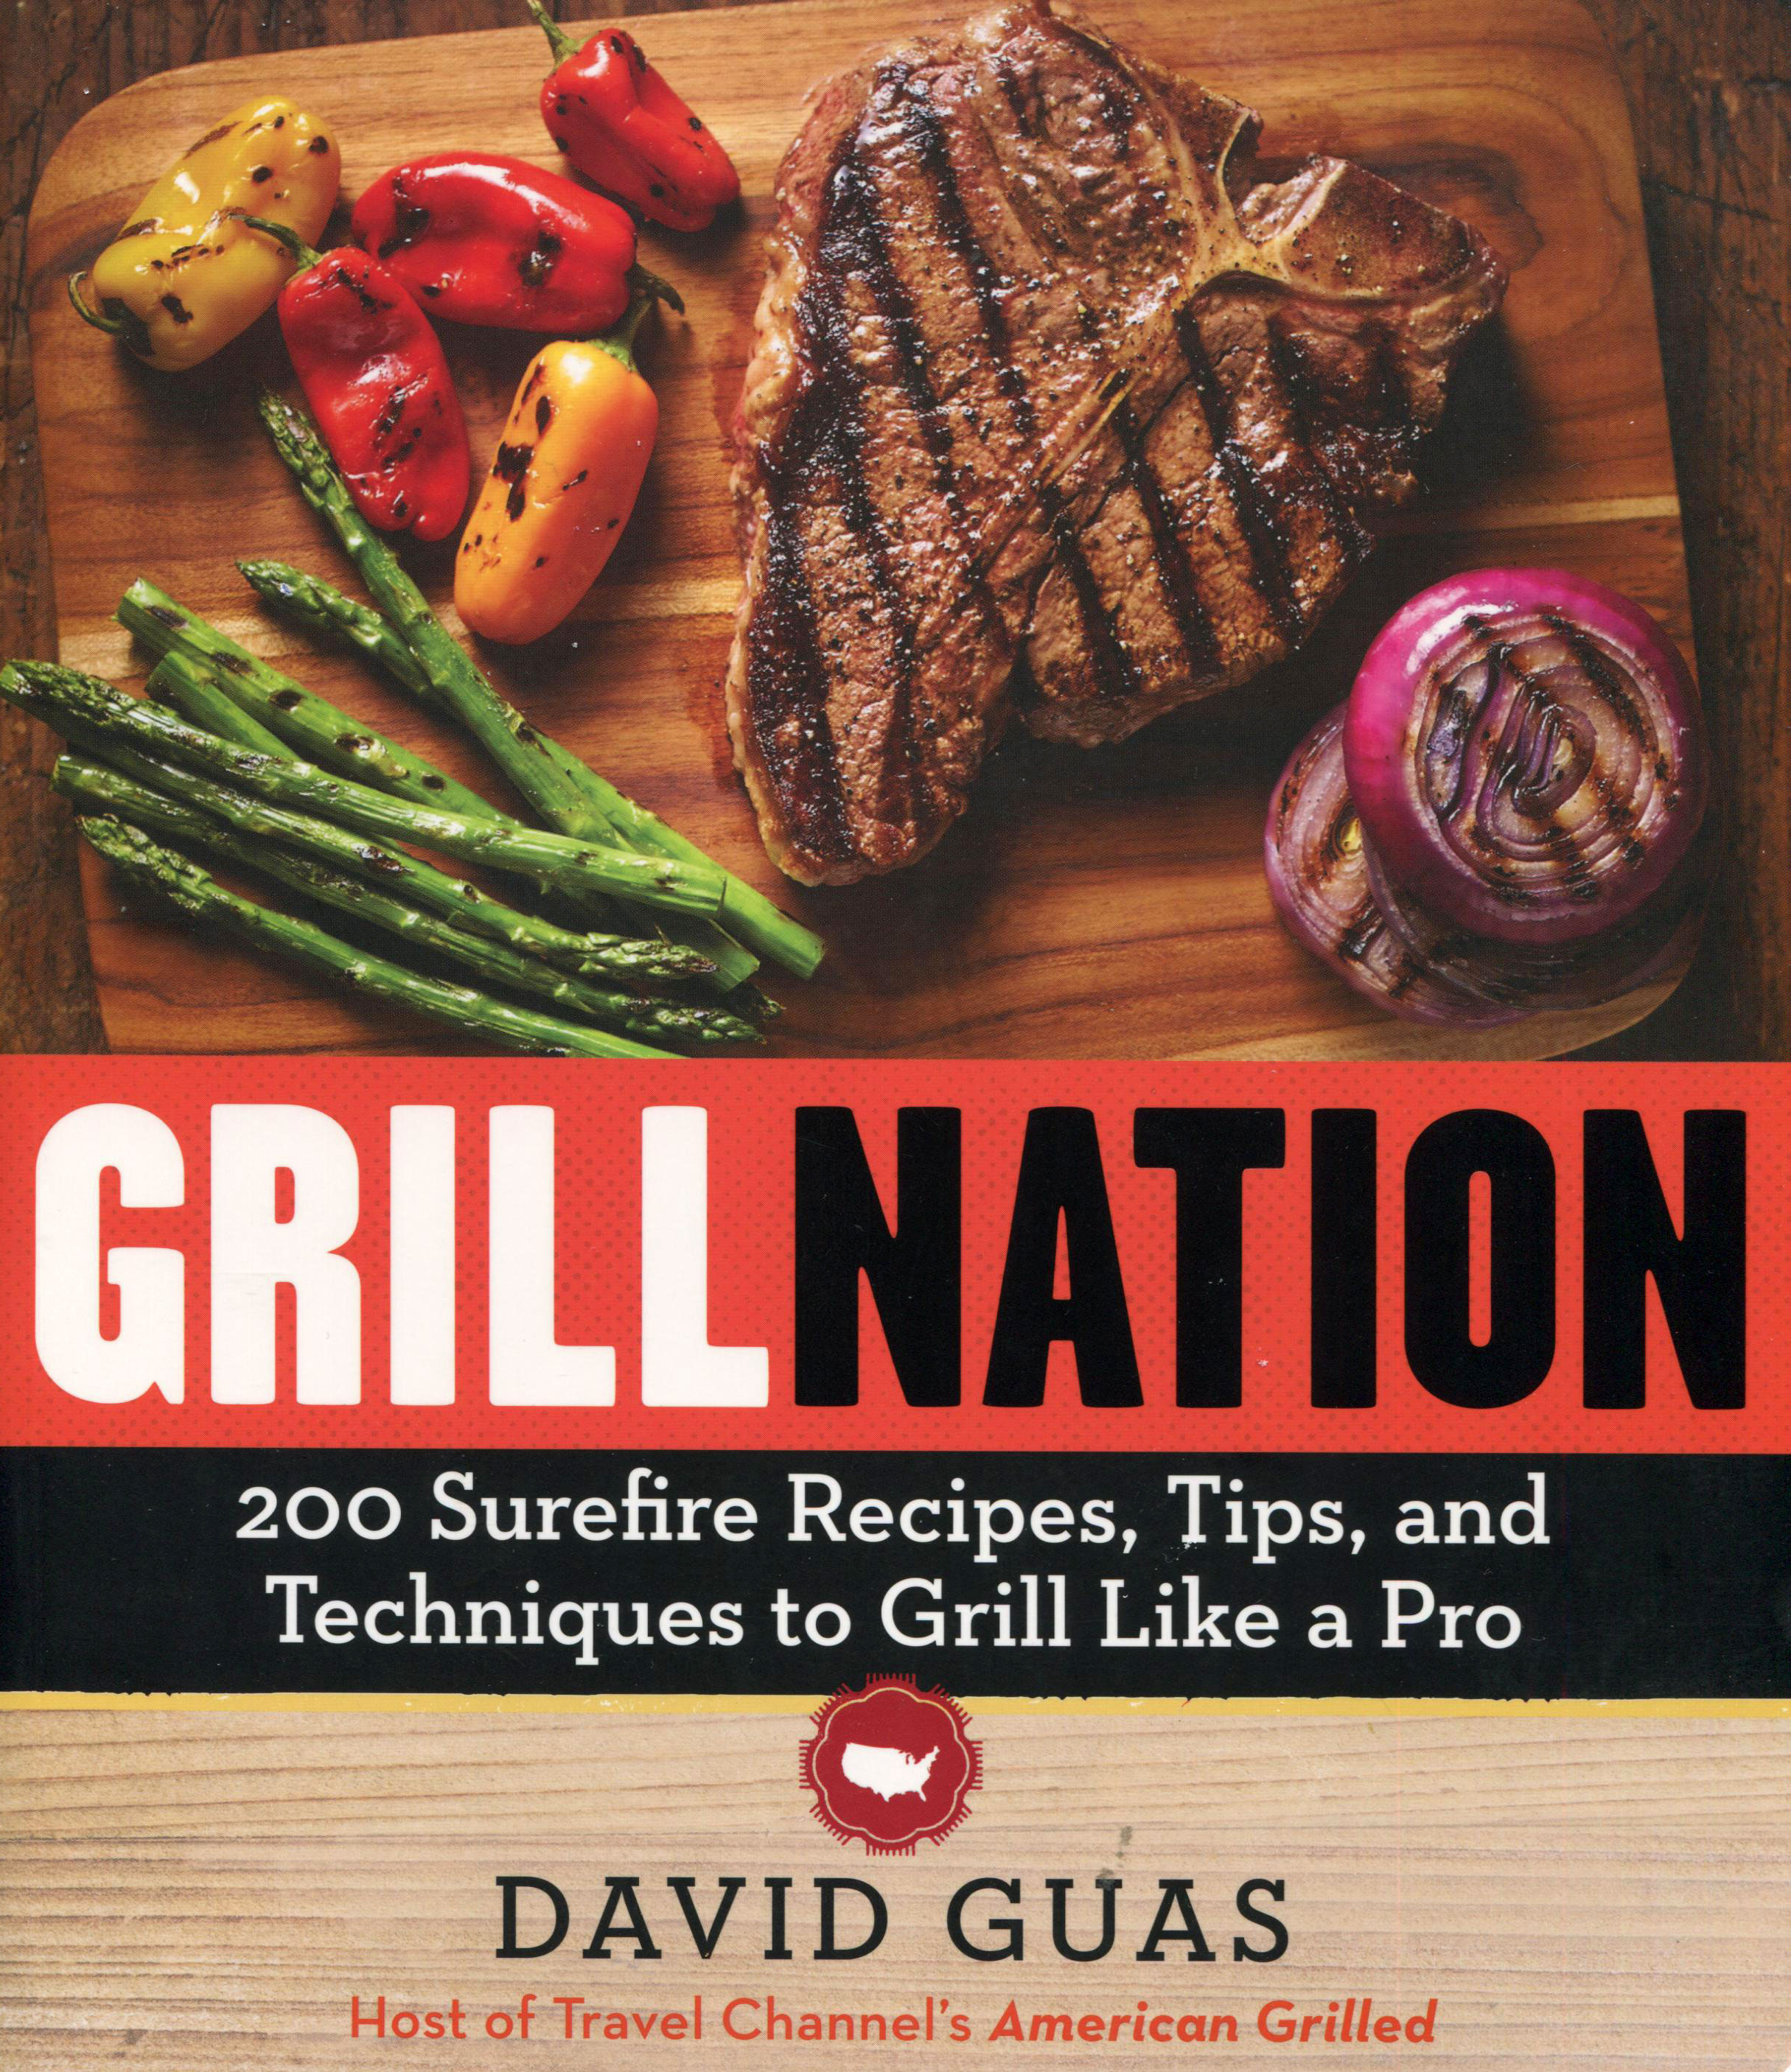 A Cookbook Review for You While We Are in Yellowstone: Grill Nation